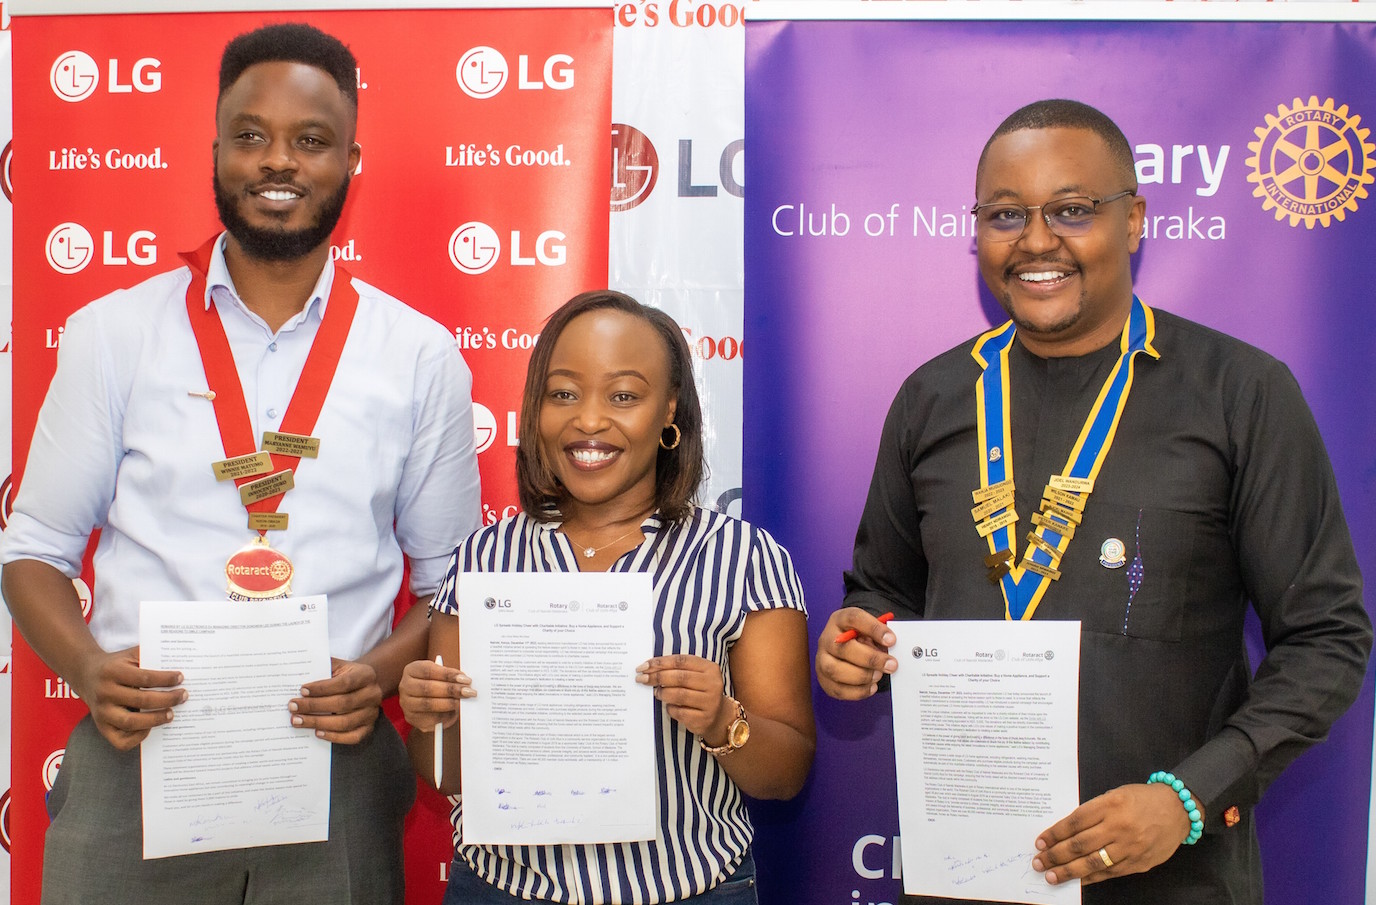 L-R), Rotaract Club of UoN Afya President, Austin Mulema; LG Electronics EA Corporate Marketing Manager, Maureen Kemunto; and Rotary Club of Nairobi Madaraka President, Joel Wandurwa, pose for a photo after signing a partnership for LG Electronics' newly launched charitable initiative aimed at spreading the festive season spirit to those in need. The partnership will ensure that the funds raised are directed toward impactful projects addressing critical community needs.